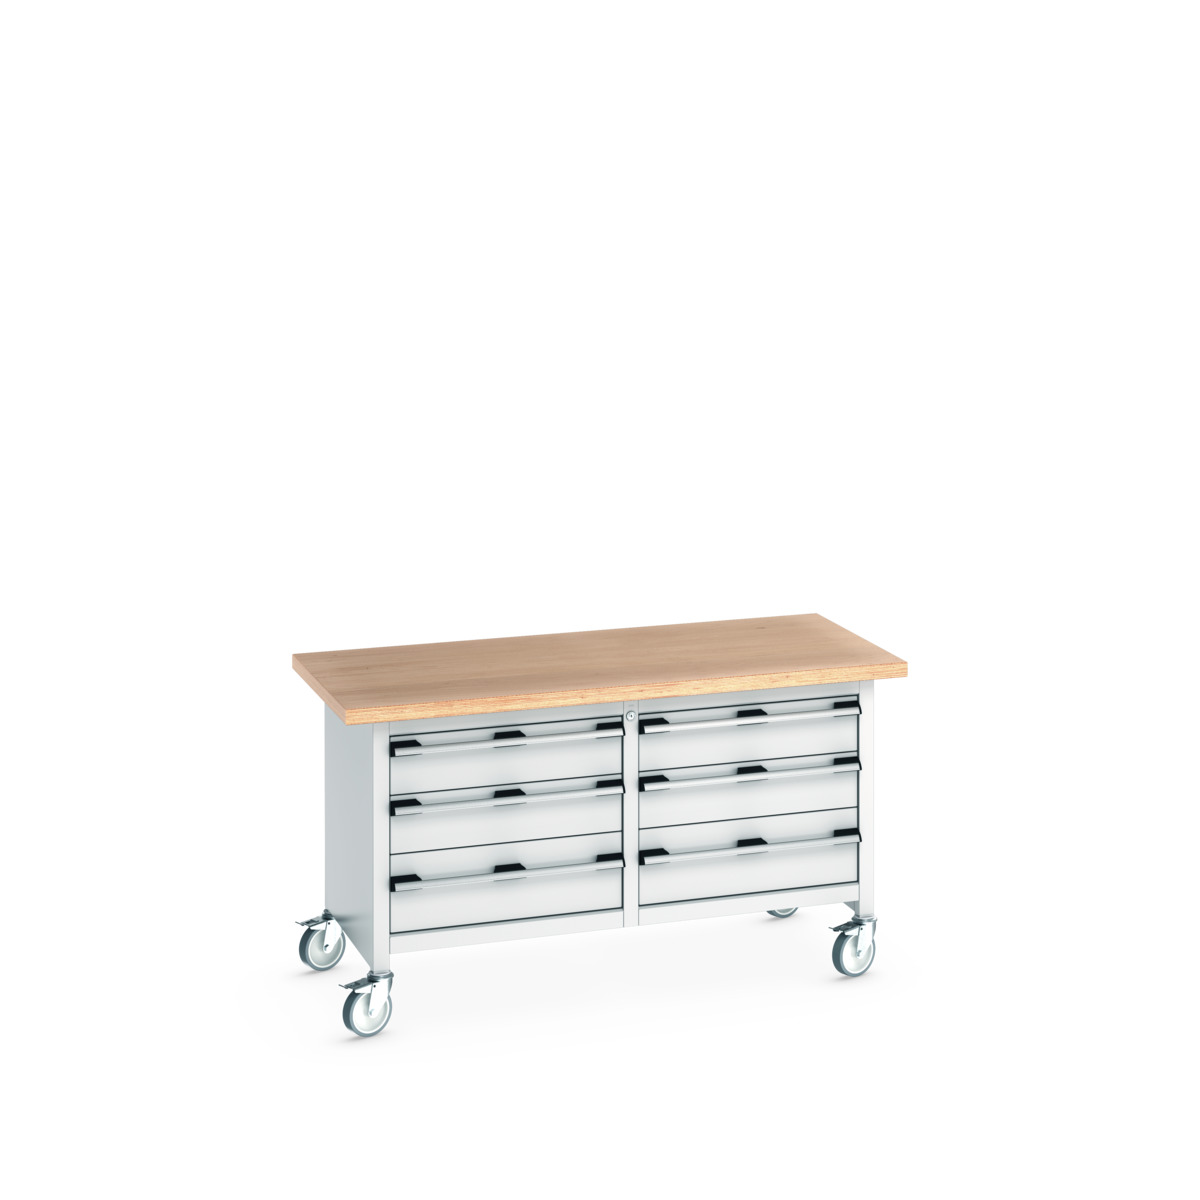 41002106.16V - cubio mobile storage bench (mpx)